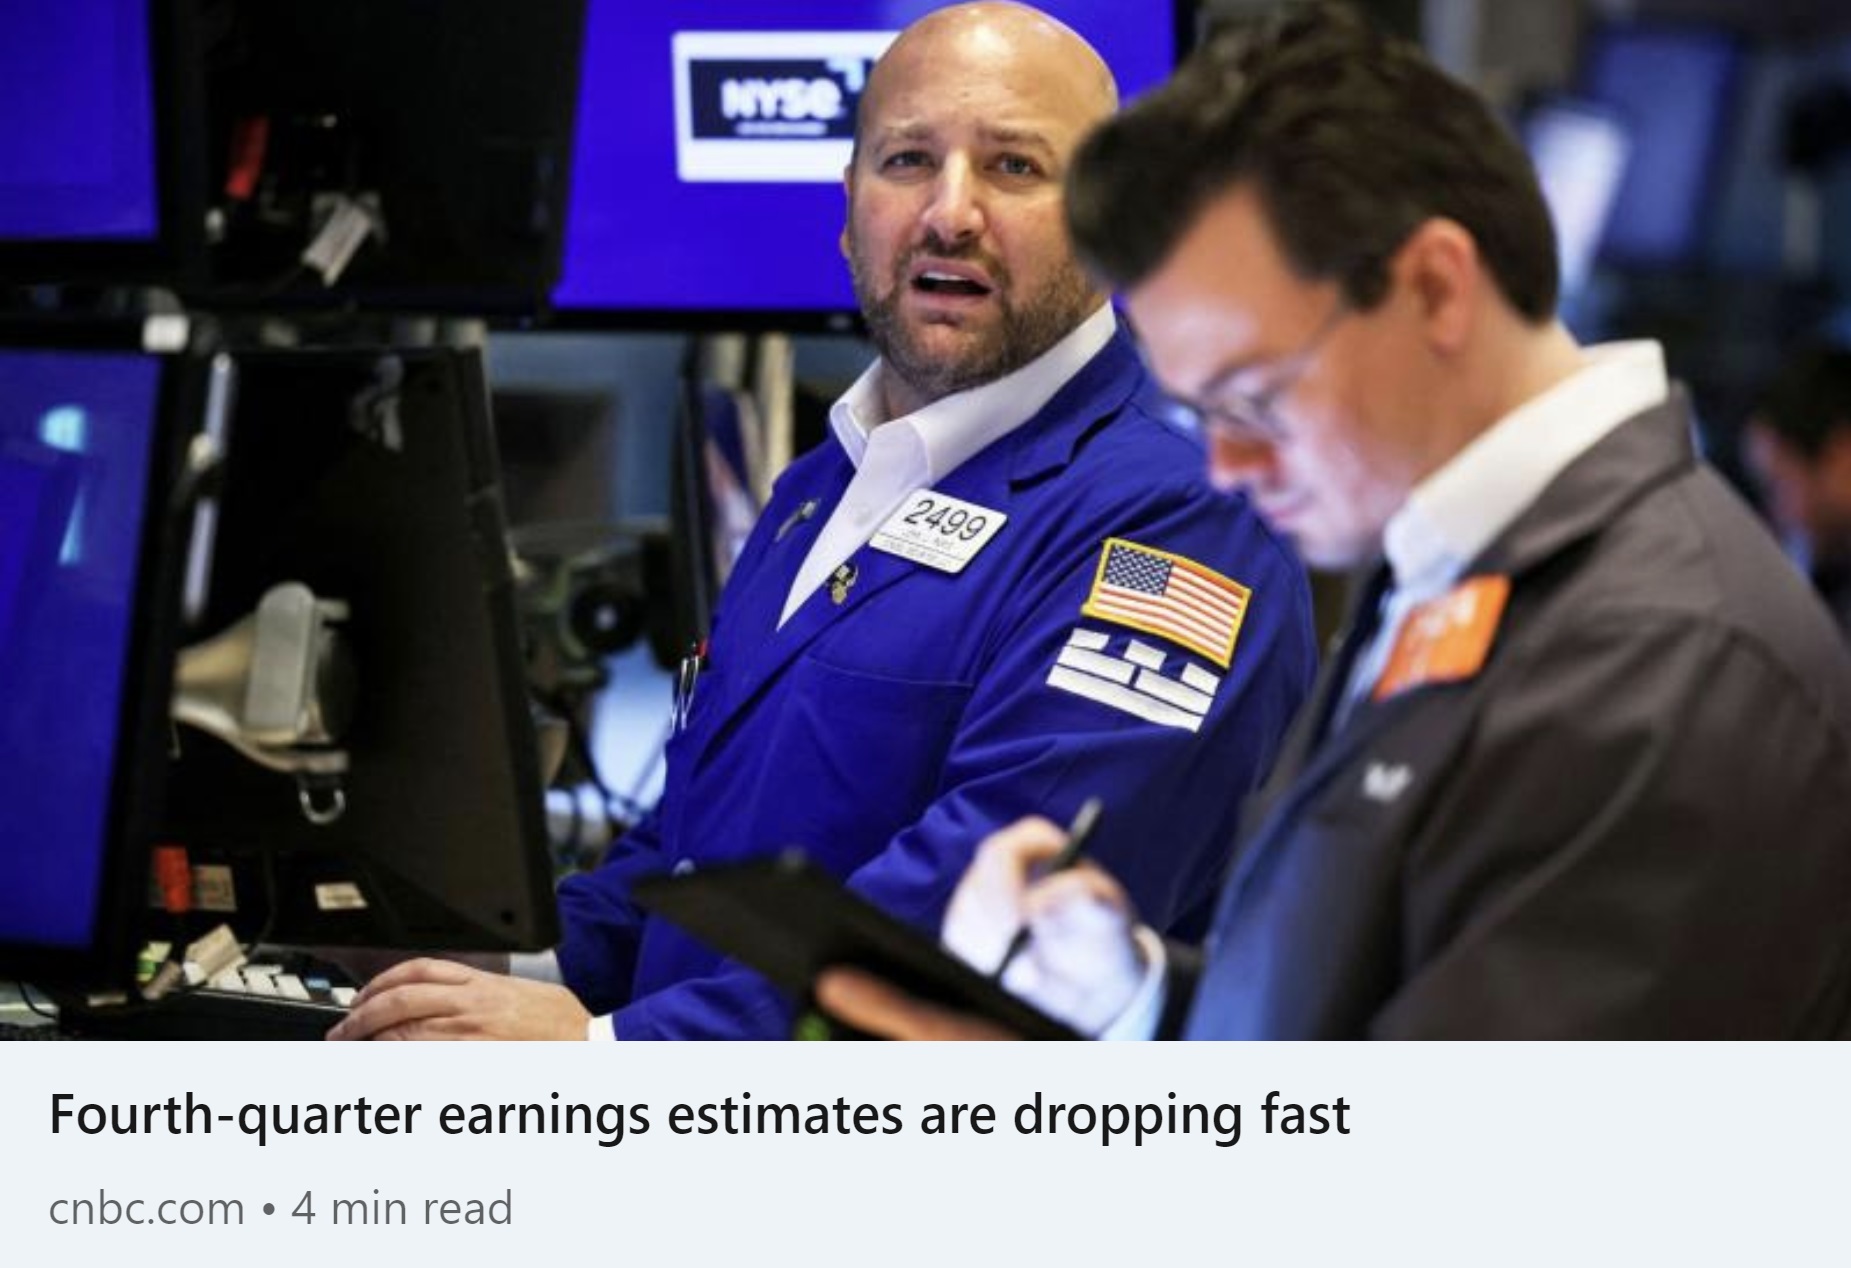 Q4 Earnings Estimates Are Dropping Fast